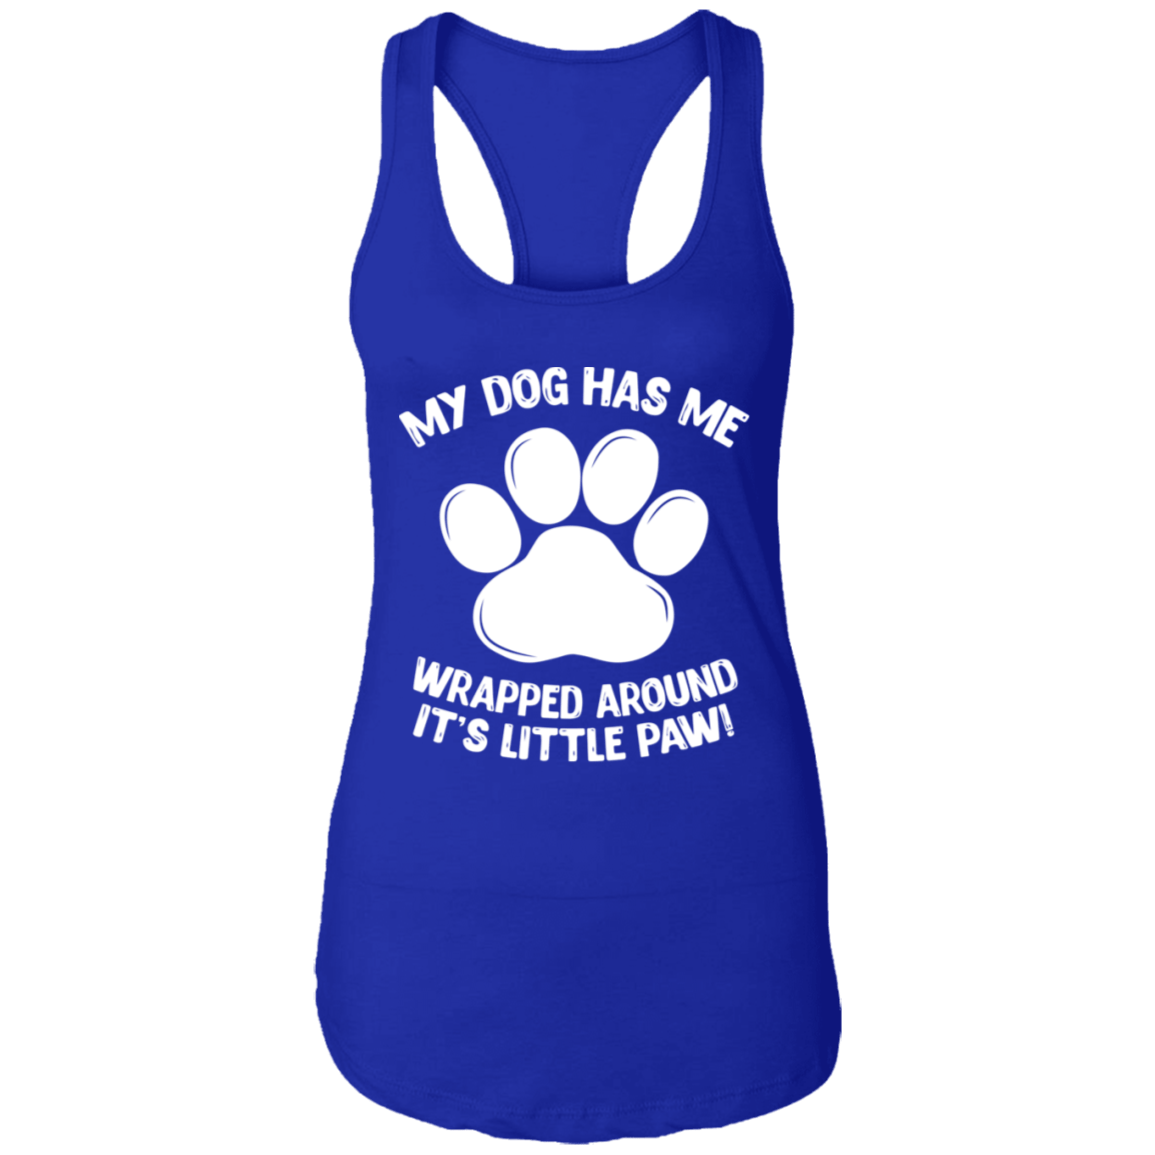 My Dog Has Me Wrapped Around It's Little Paw - Ladies Racer Back Tank.